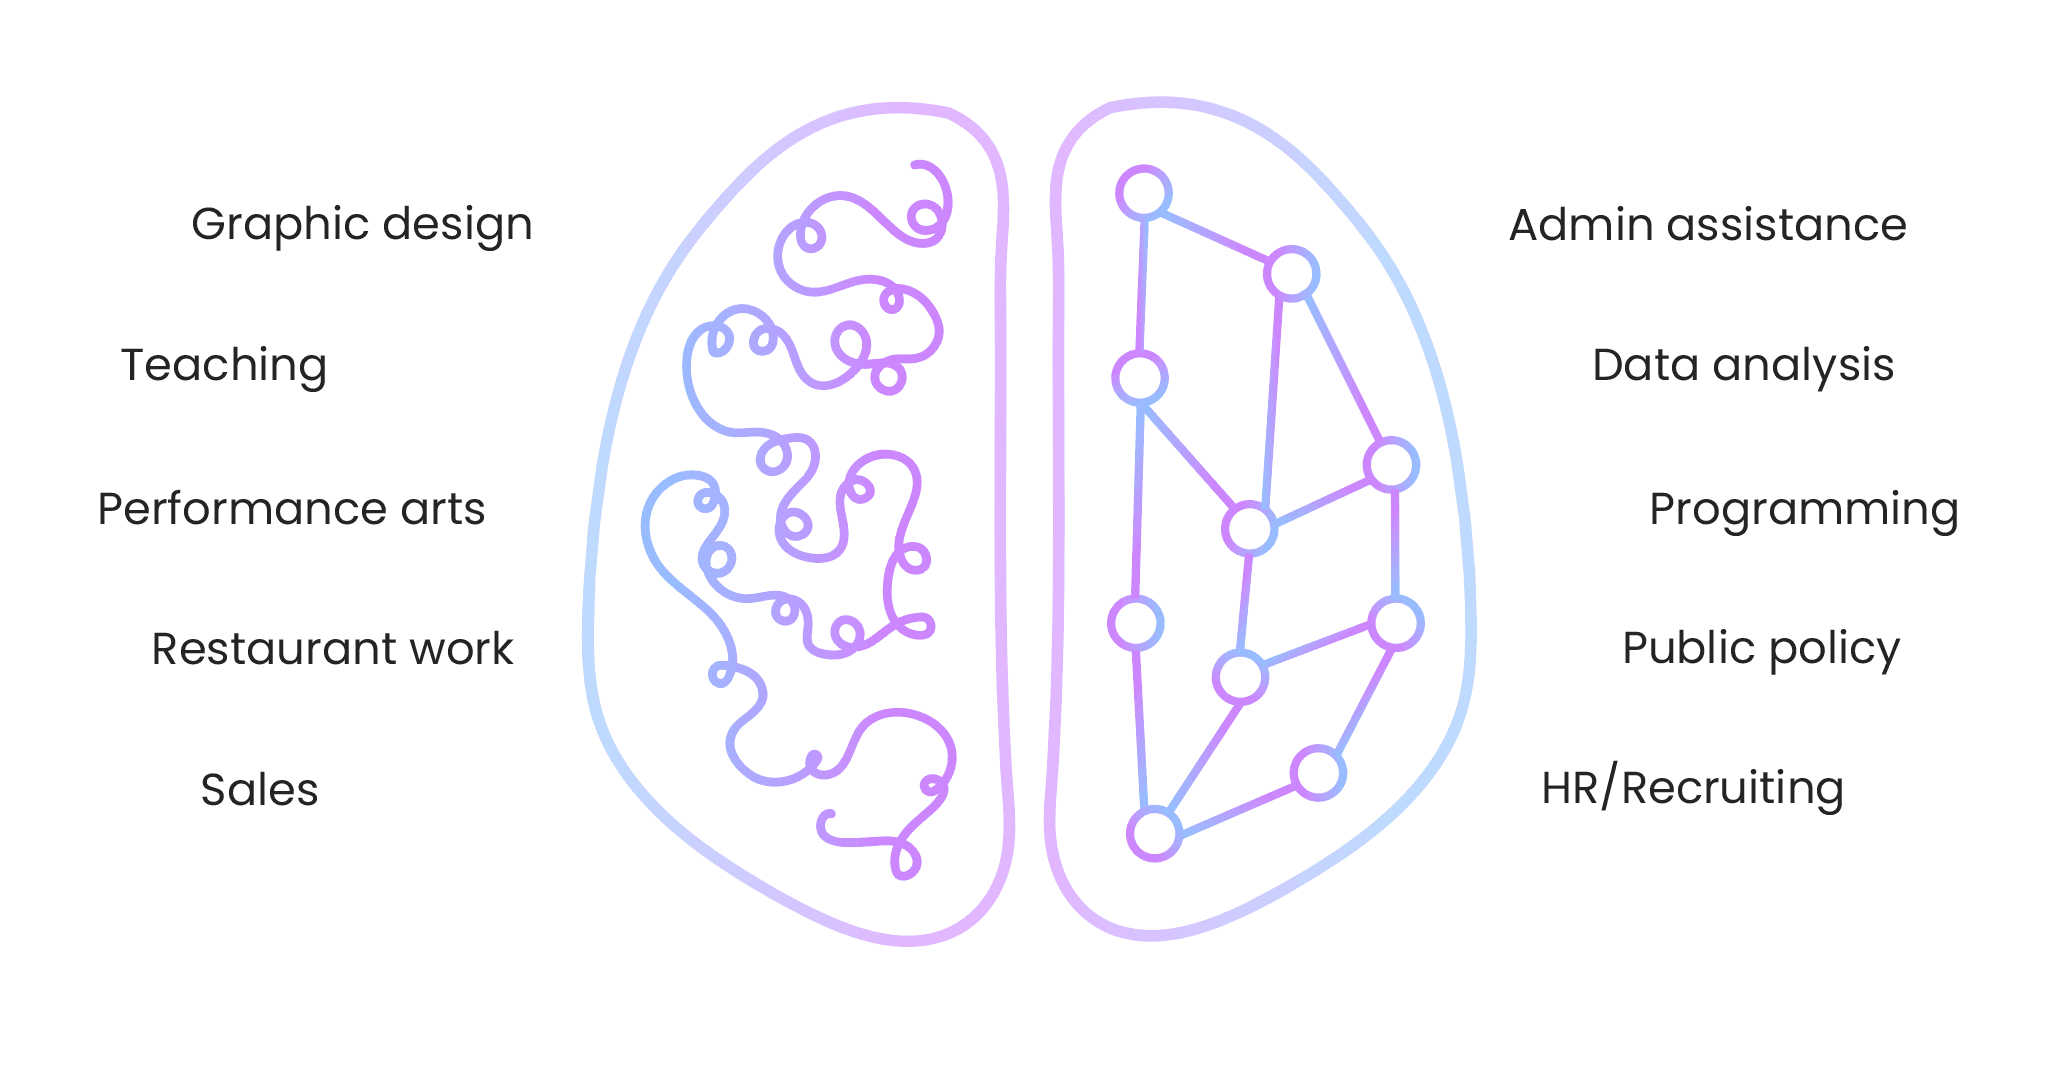 Illustration of a neurodivergent brain, featuring skills like Graphic Design, Teaching, Performance Arts, Restaurant Work, Sales, Admin Assistance, Data Analysis, Programming, Public Policy, HR/Recruiting